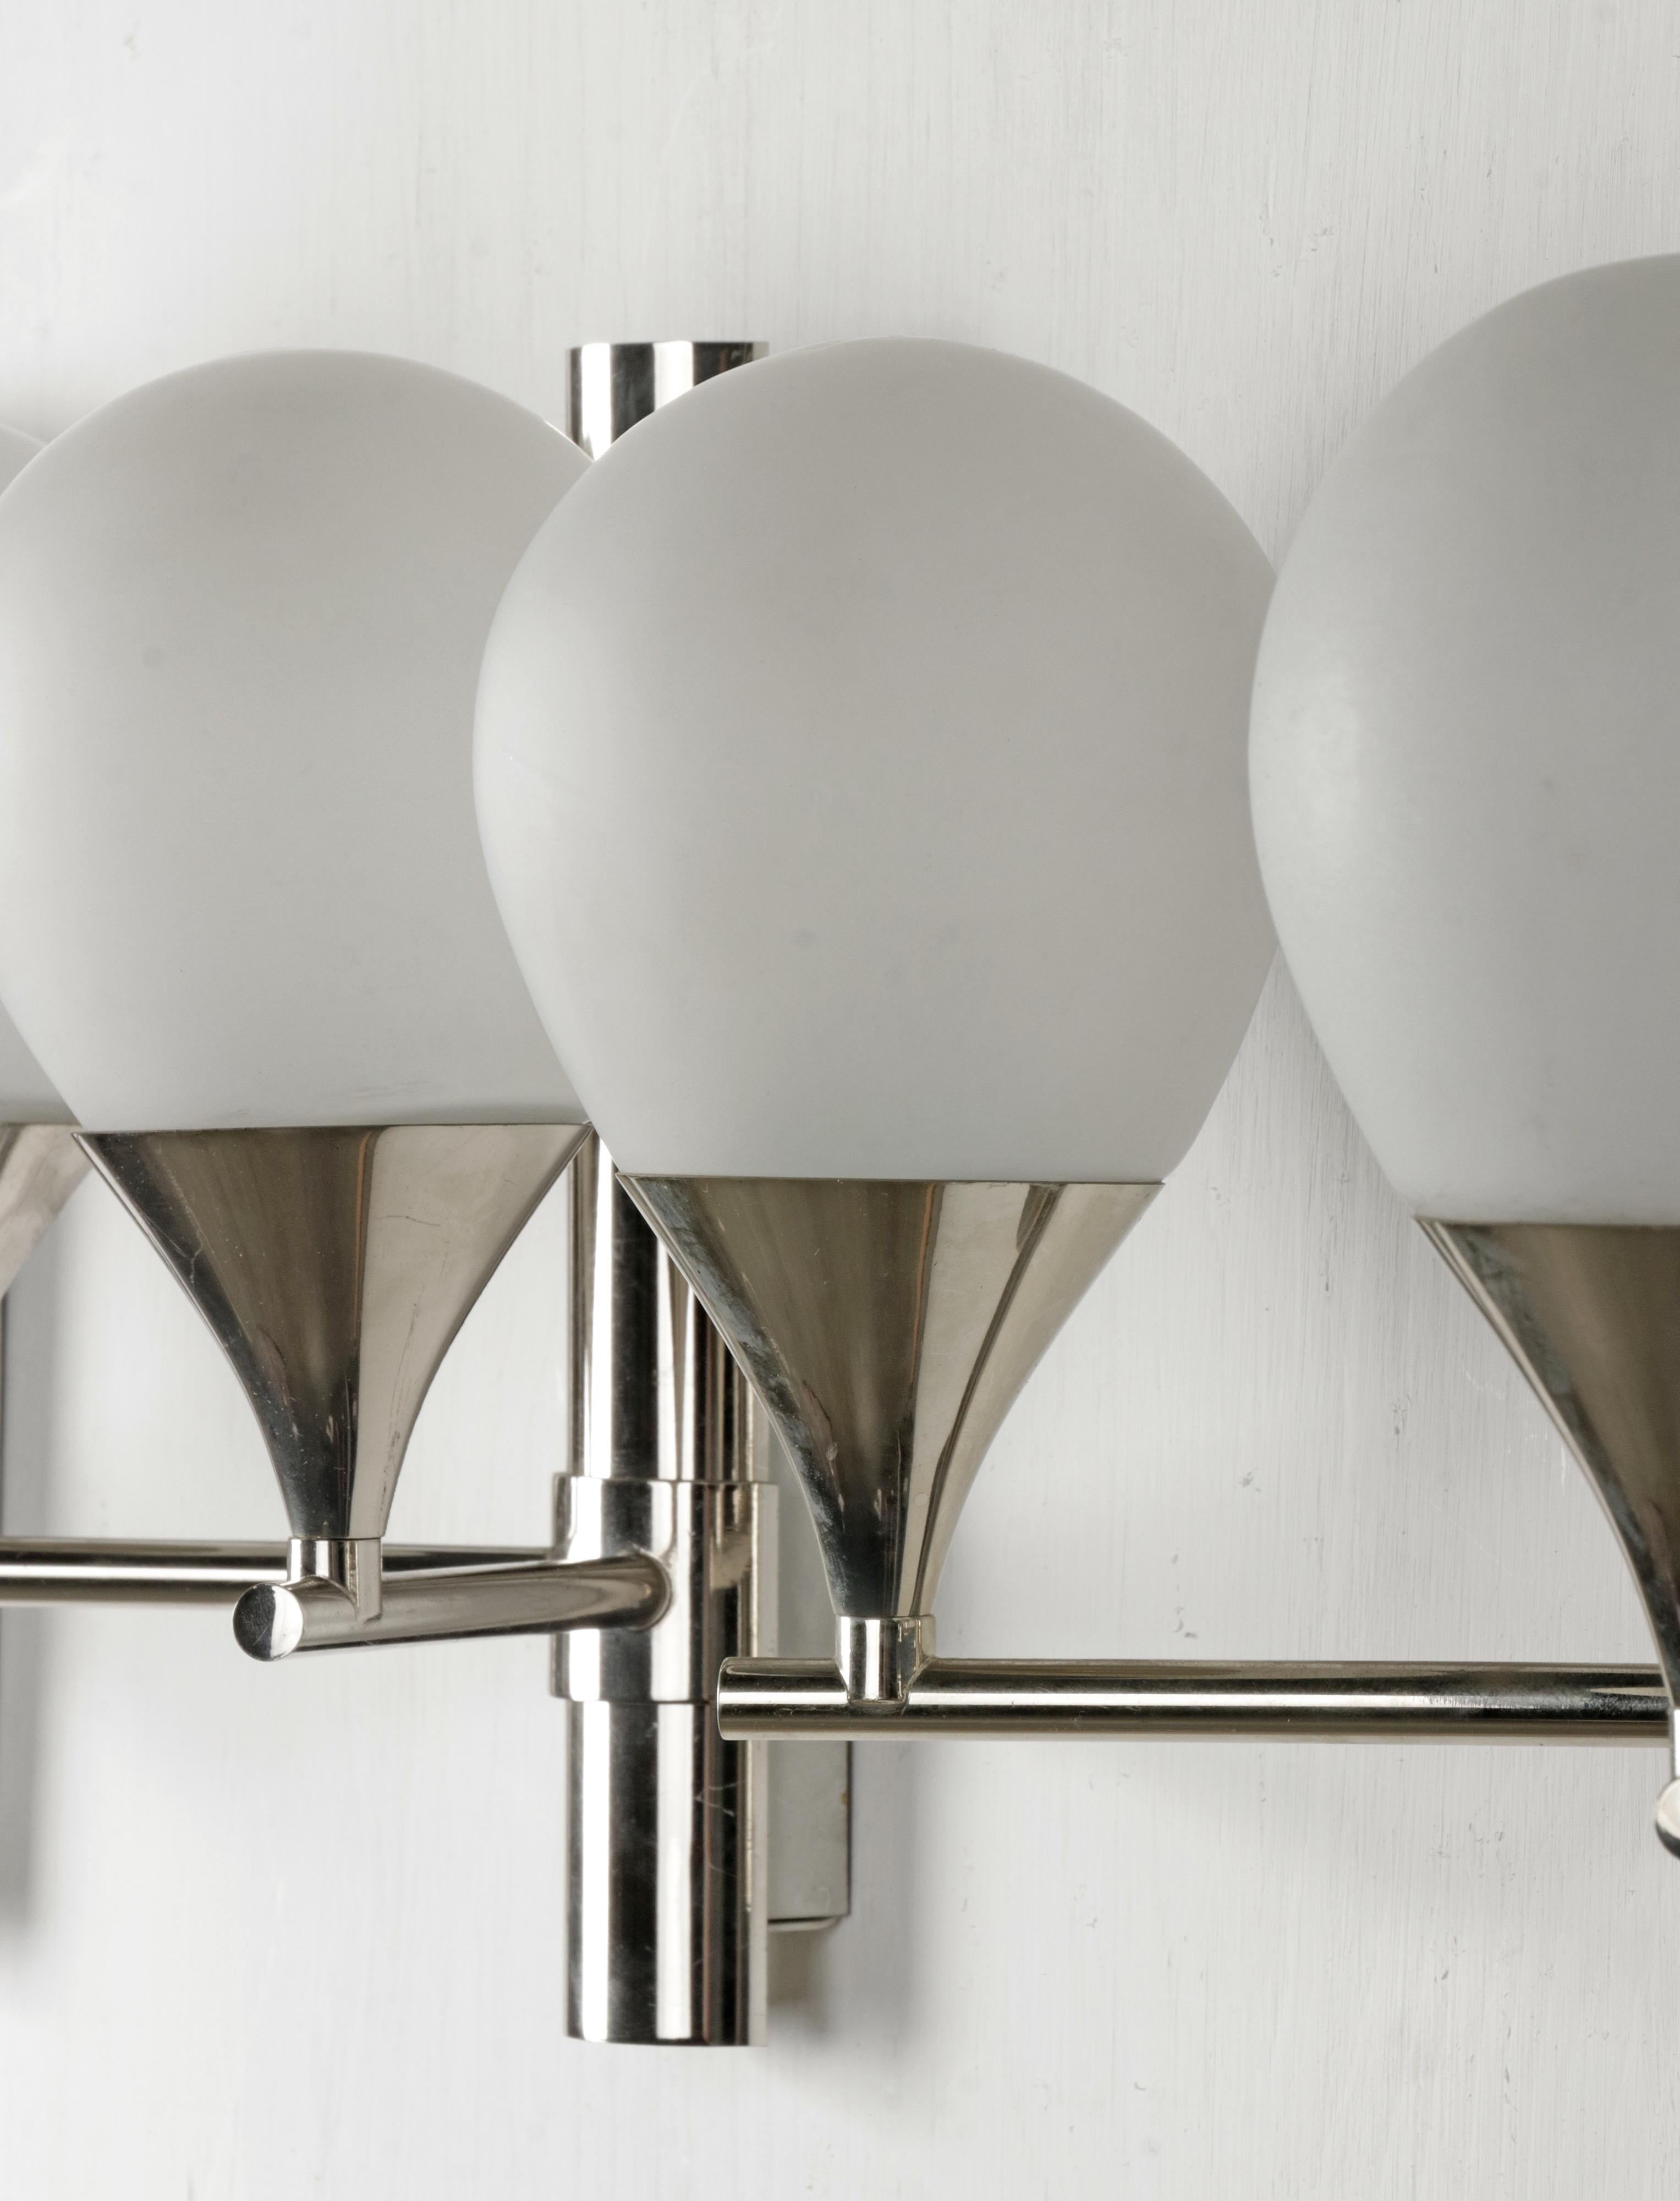 Set of Four Mid-Century Modern Chrome Plated Sconces / Wall Lights For Sale 2